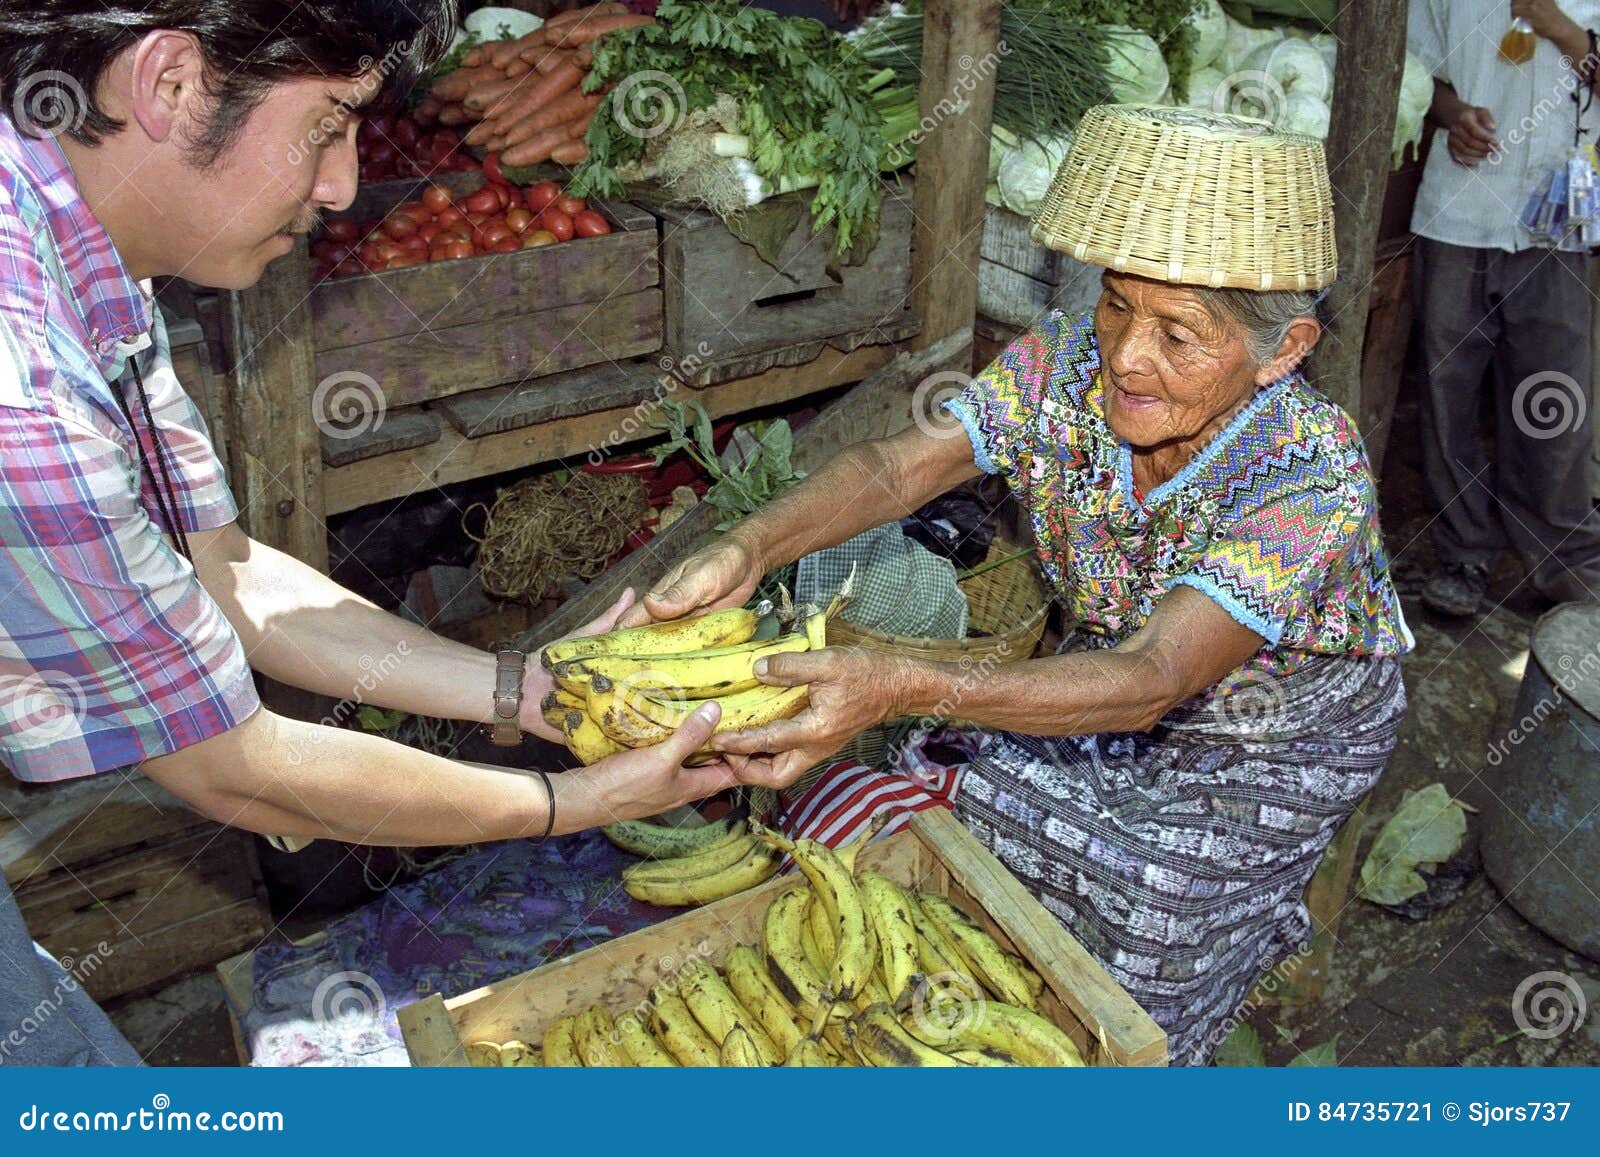 Old Indian Market Woman Sells Fruit And Vegetables ...